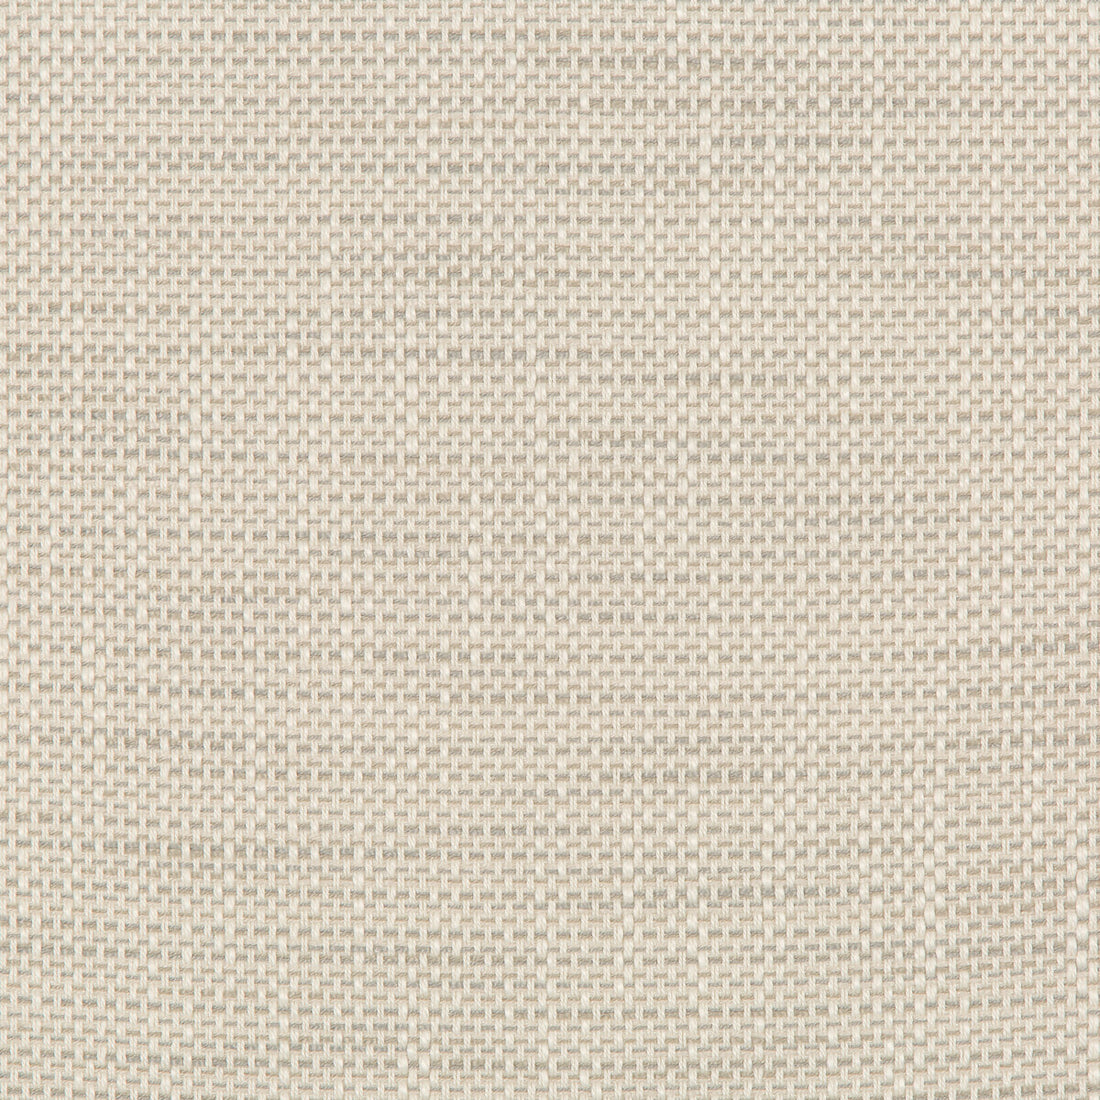 Kravet Design fabric in 36082-1101 color - pattern 36082.1101.0 - by Kravet Design in the Inside Out Performance Fabrics collection